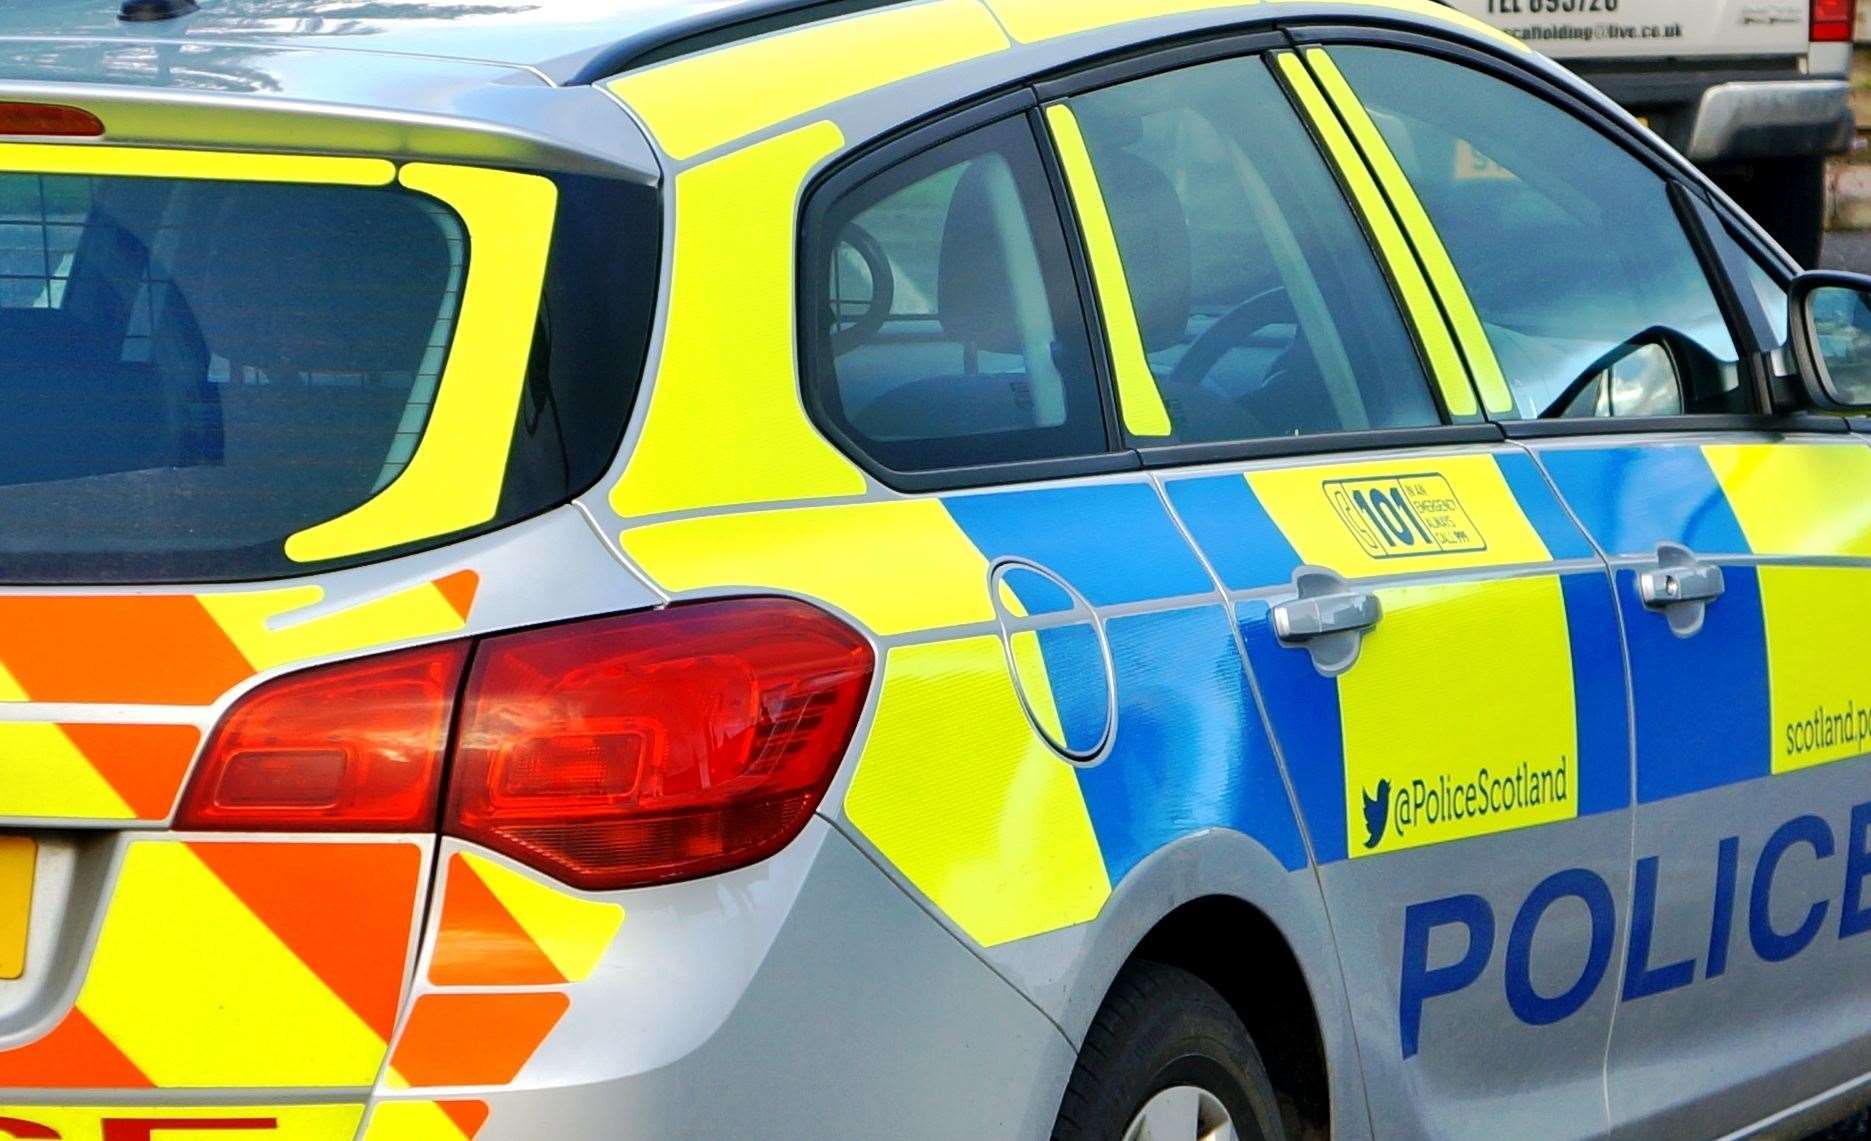 Police officers are dealing with a road traffic accident on the A9 near Thurso.